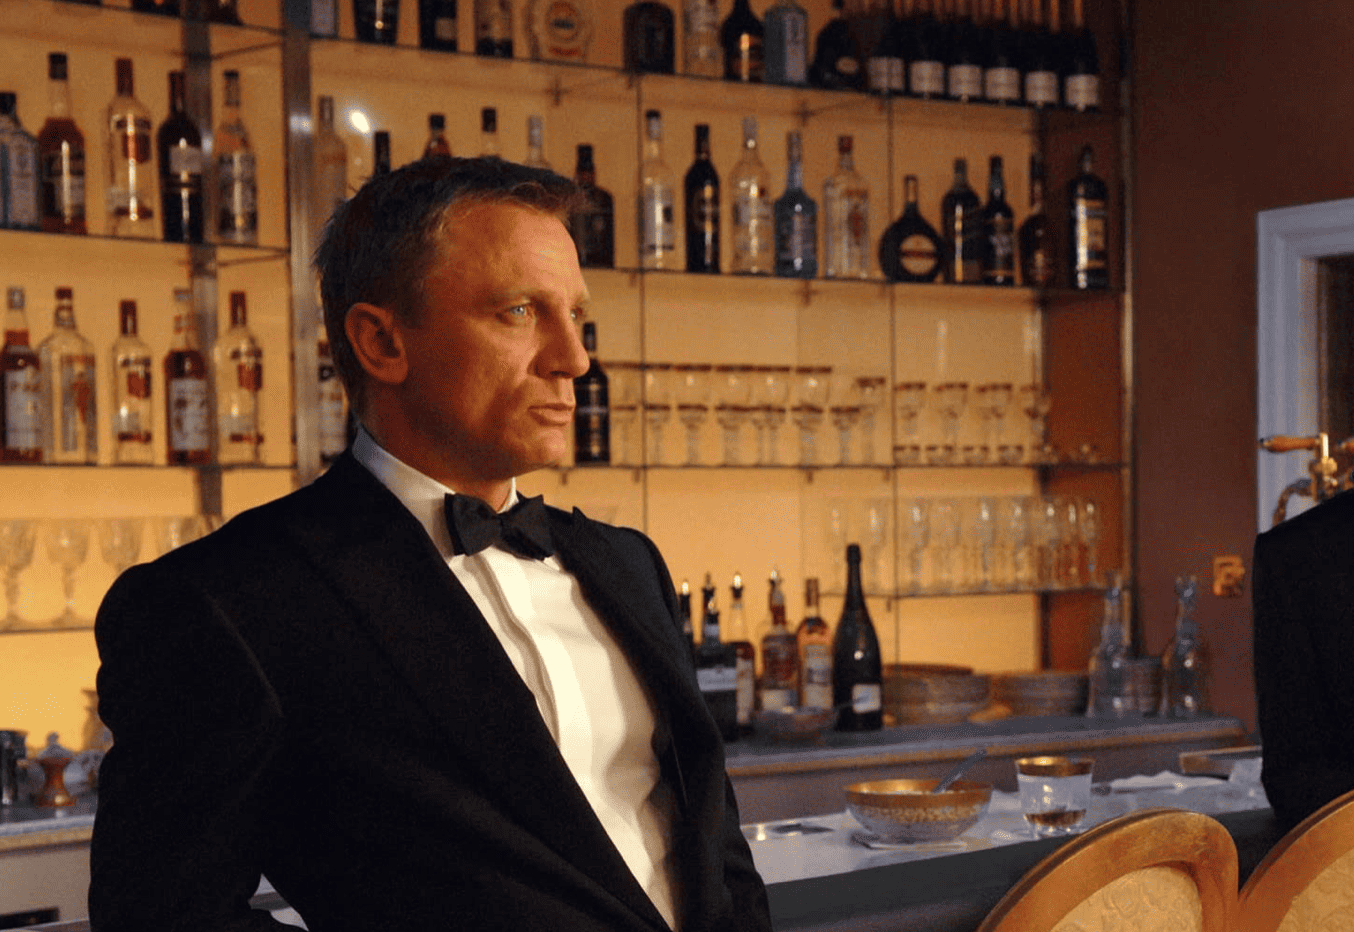 Bond takes stock of the casino room in this image from HBO Max